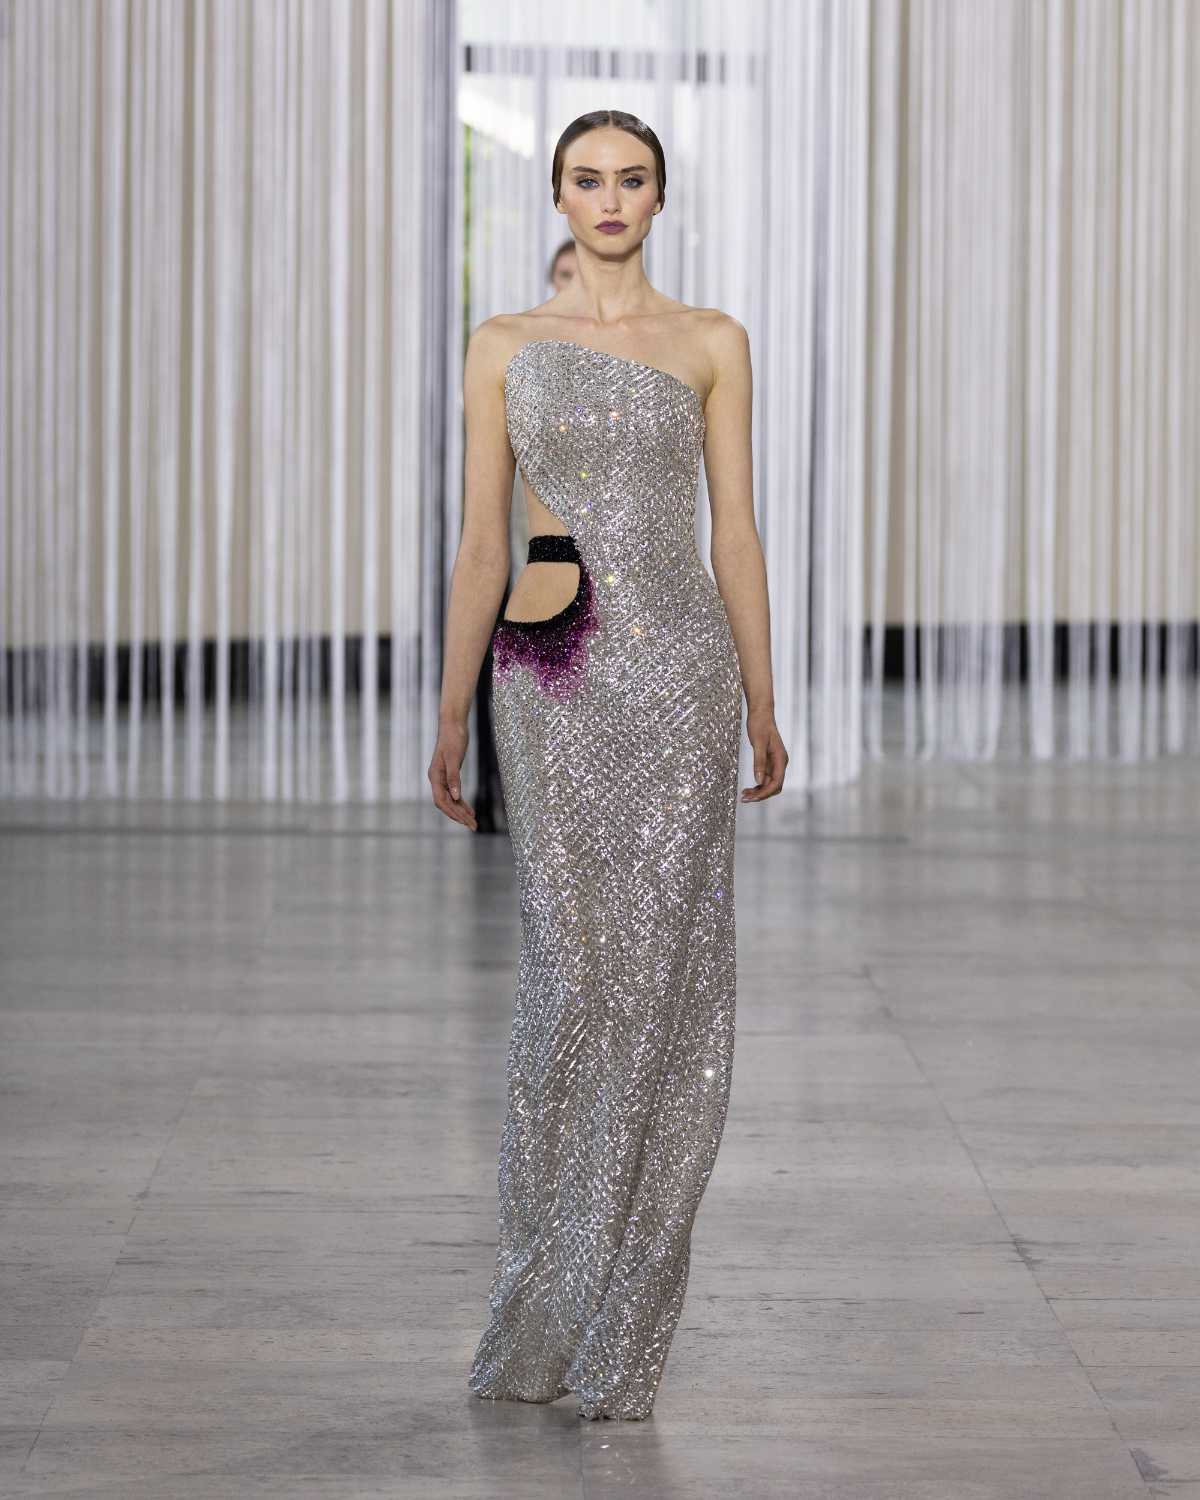 Tony Ward Presents His New Couture Fall Winter 2023/24 Collection: Under My Skin